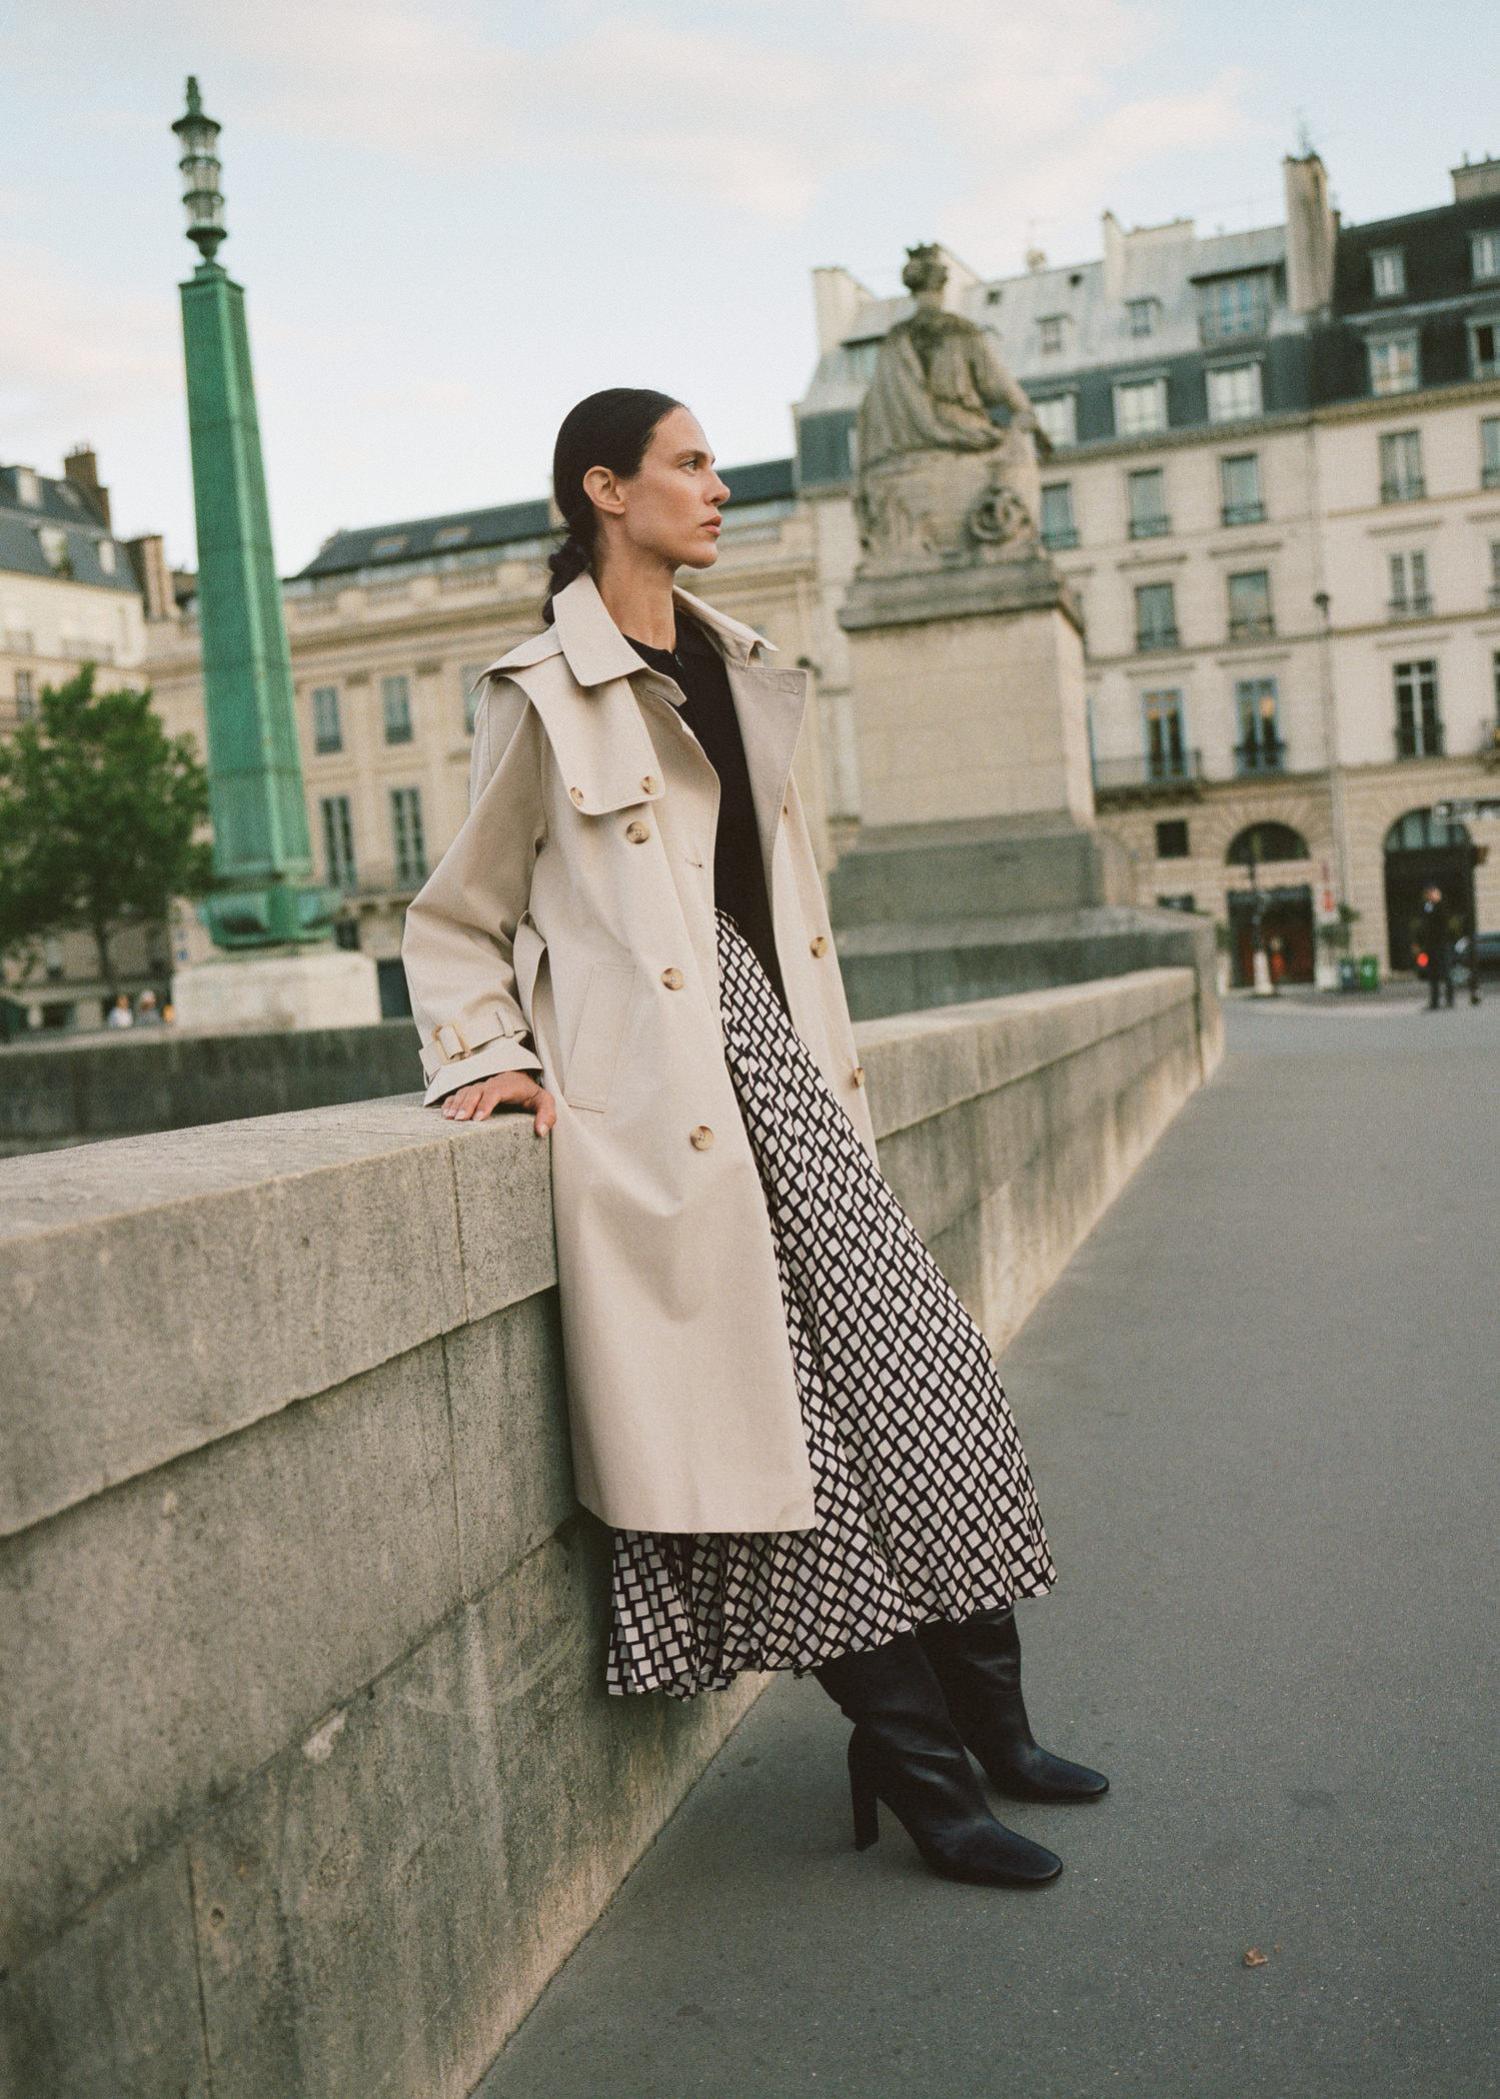  Aymeline Valade in Paris by Alejandro Sonoro for Mango Fall 2021 Ad Campaign. Clothing: Mango Trench coat with detachable hood / Mango High heel leather boot